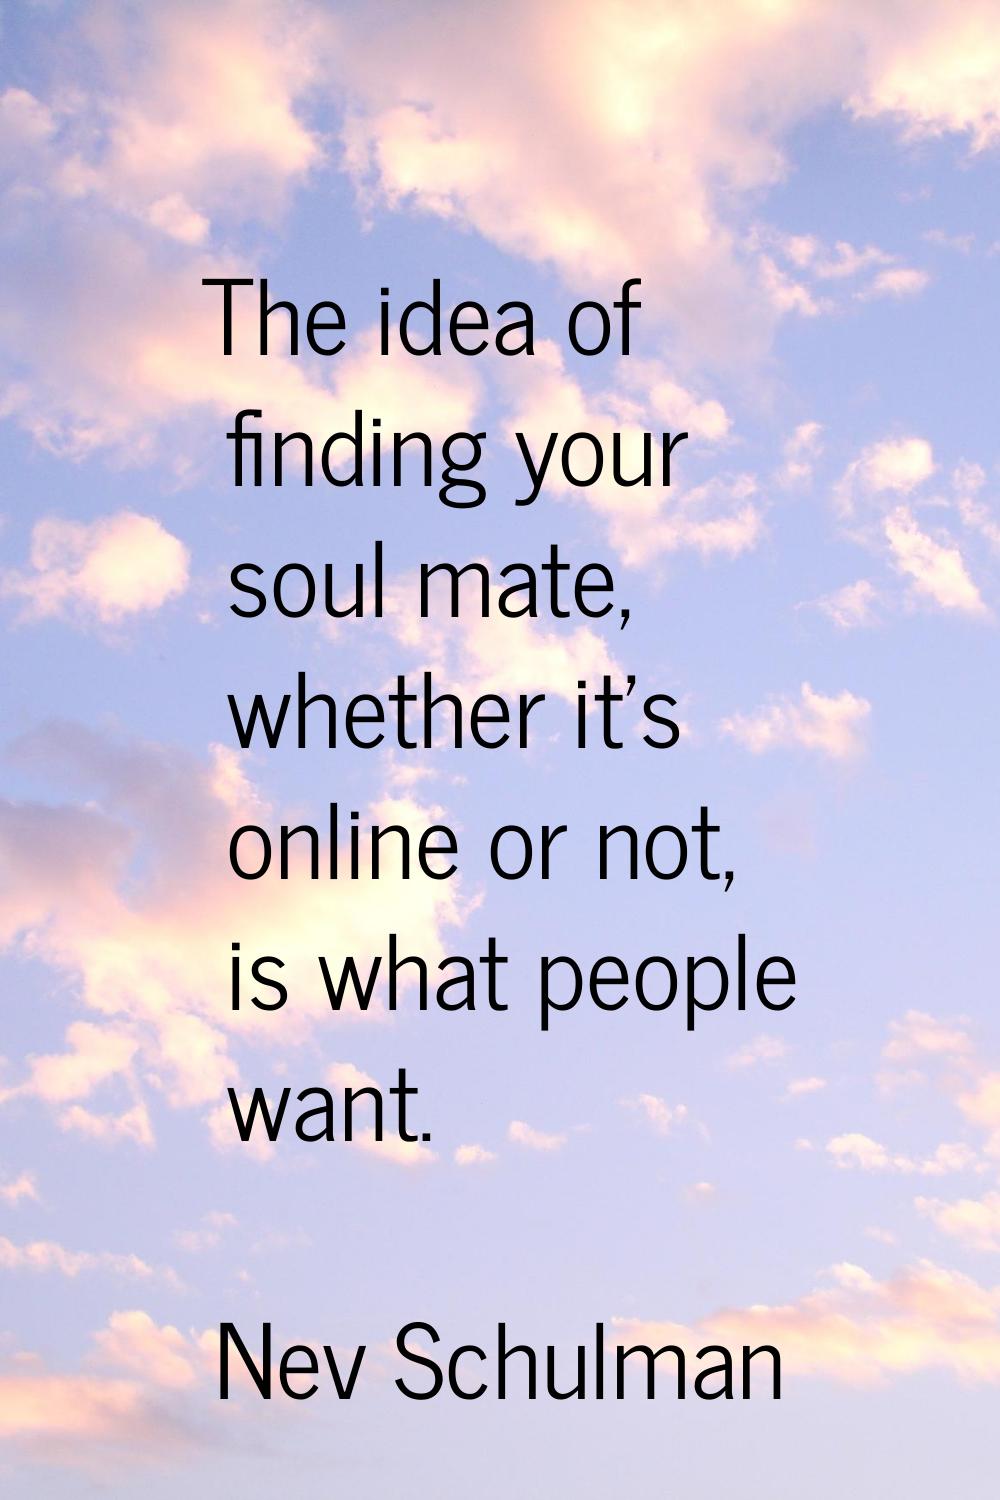 The idea of finding your soul mate, whether it's online or not, is what people want.